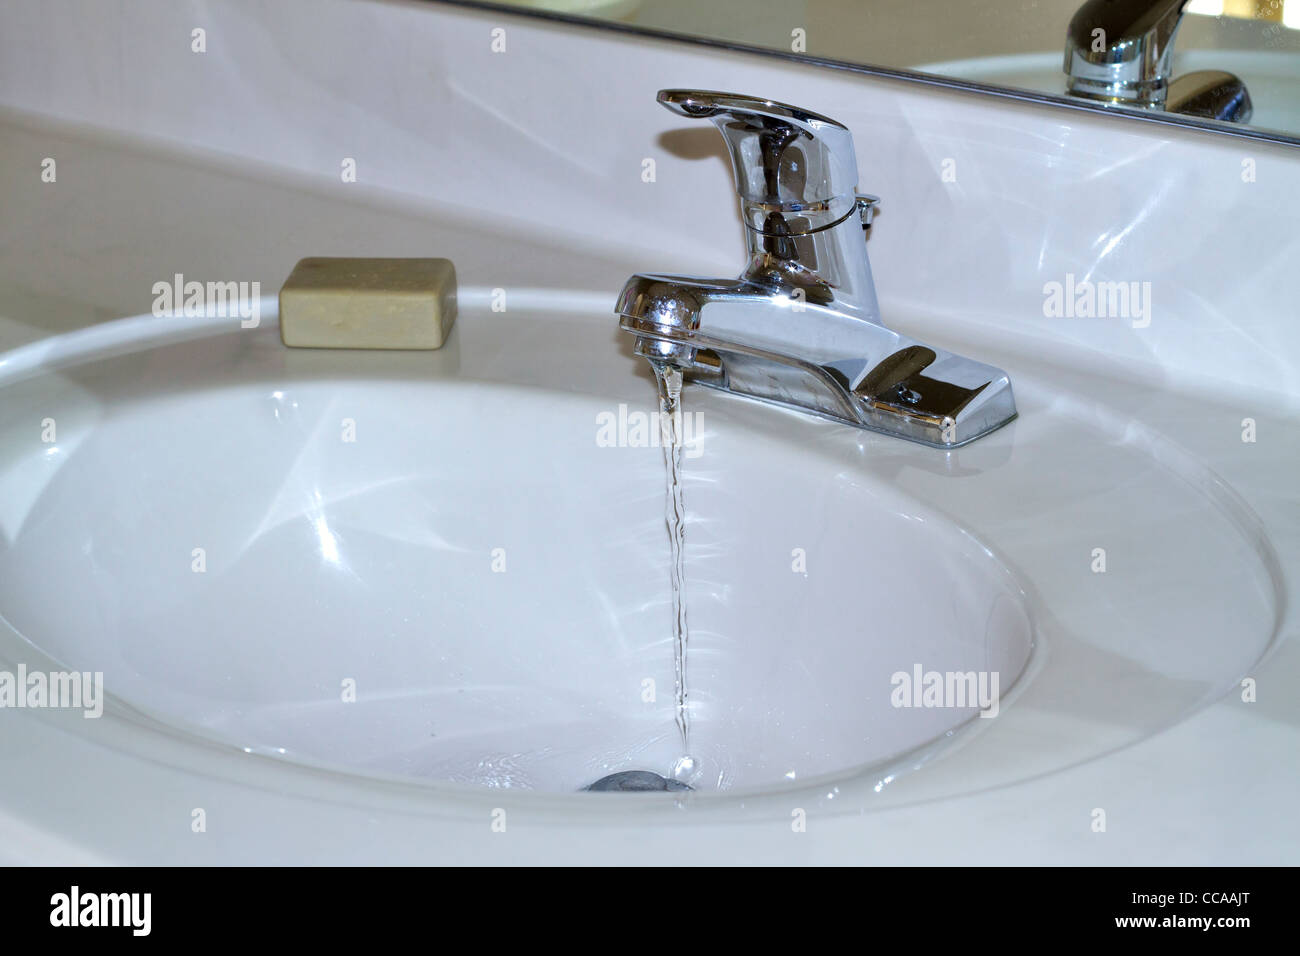 Bathroom sink with tap running Stock Photo